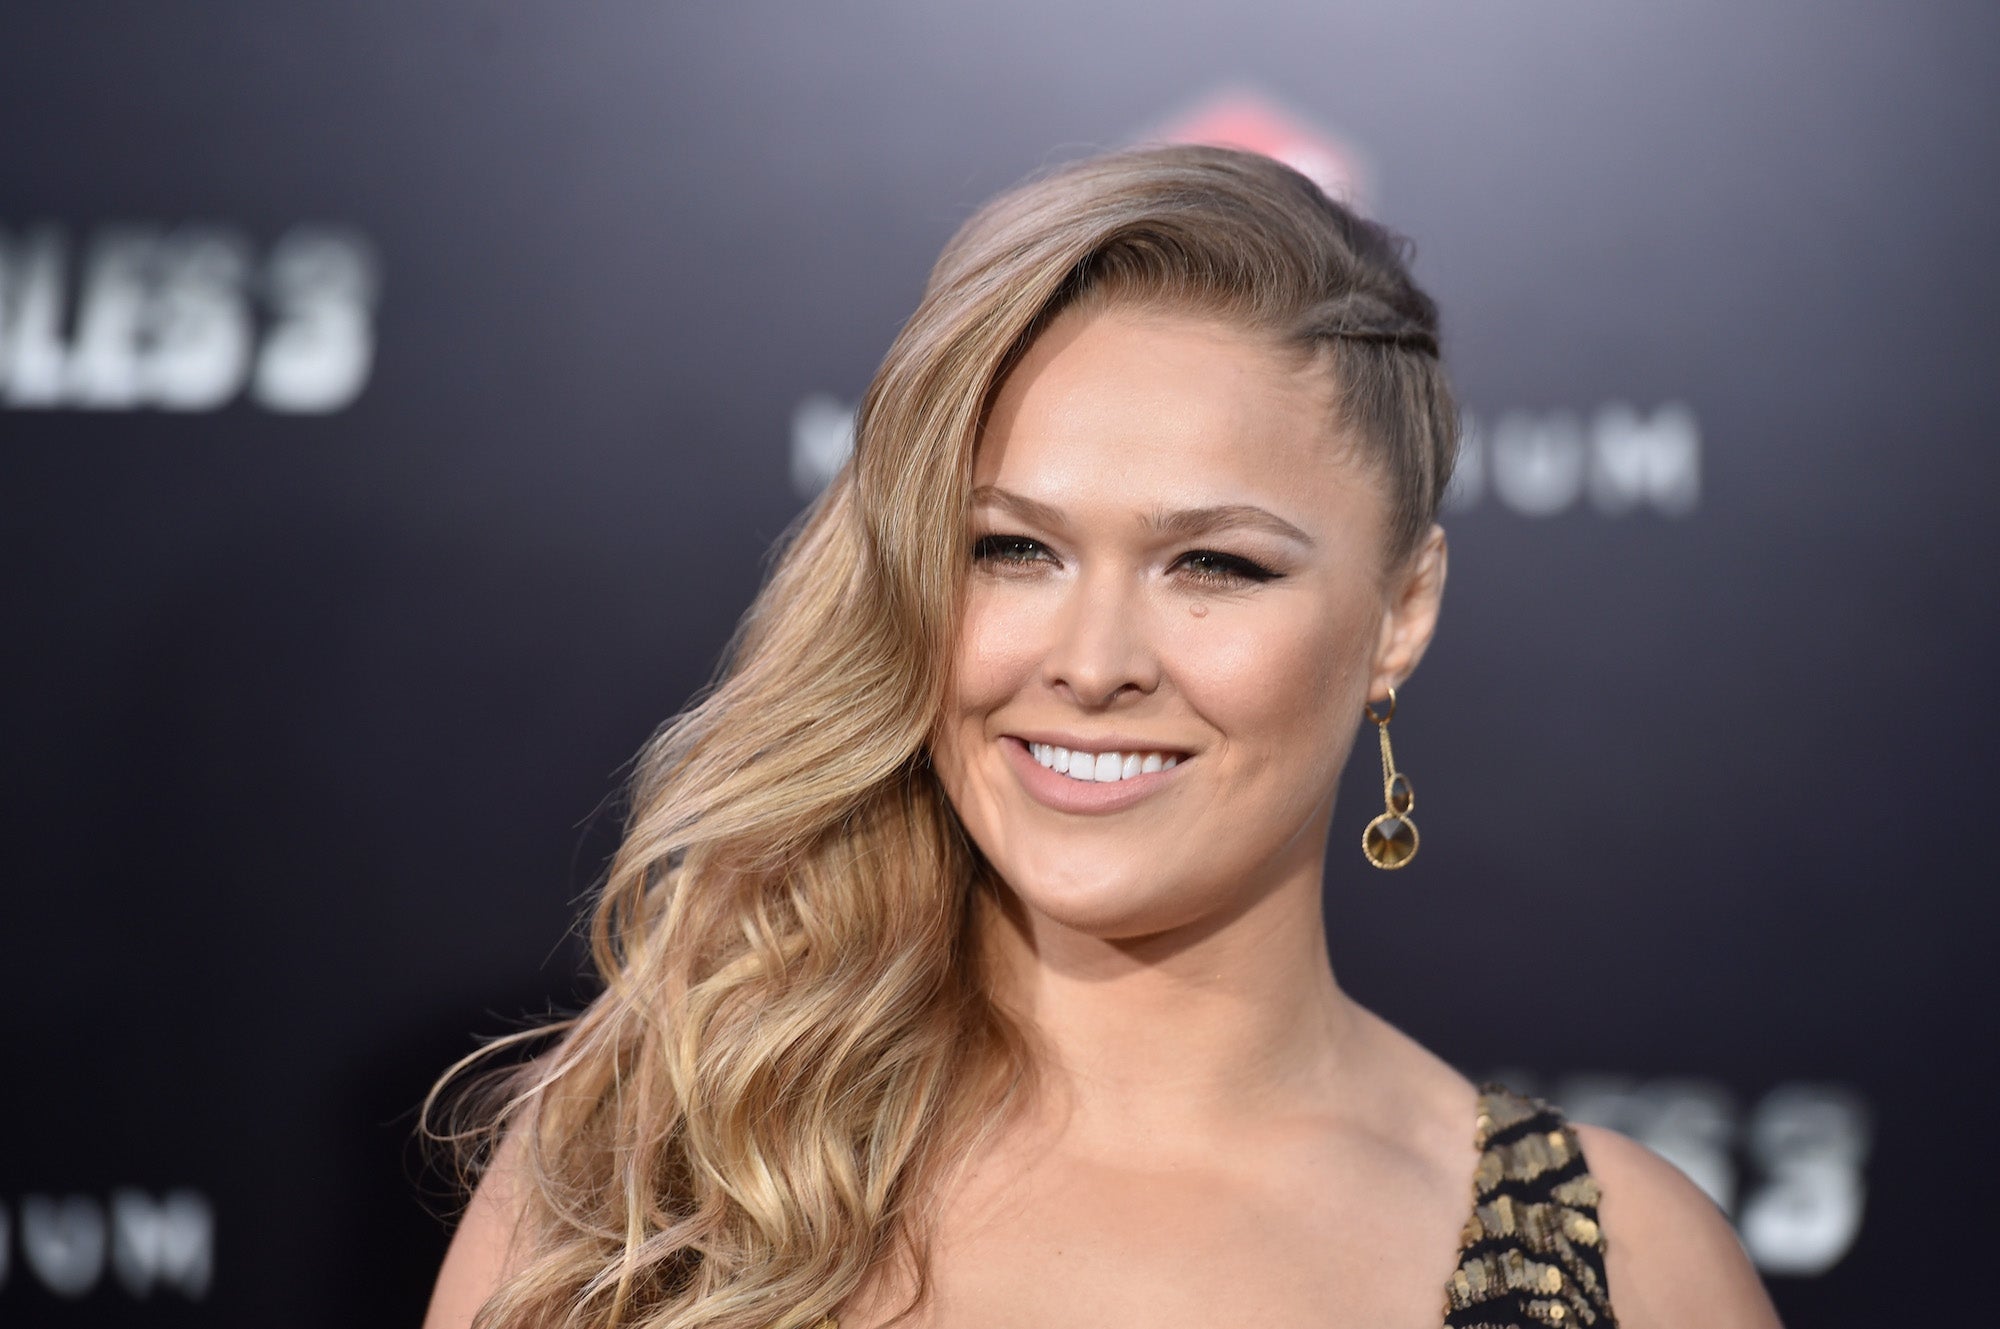 Rousey agreed to be the marine's date in September